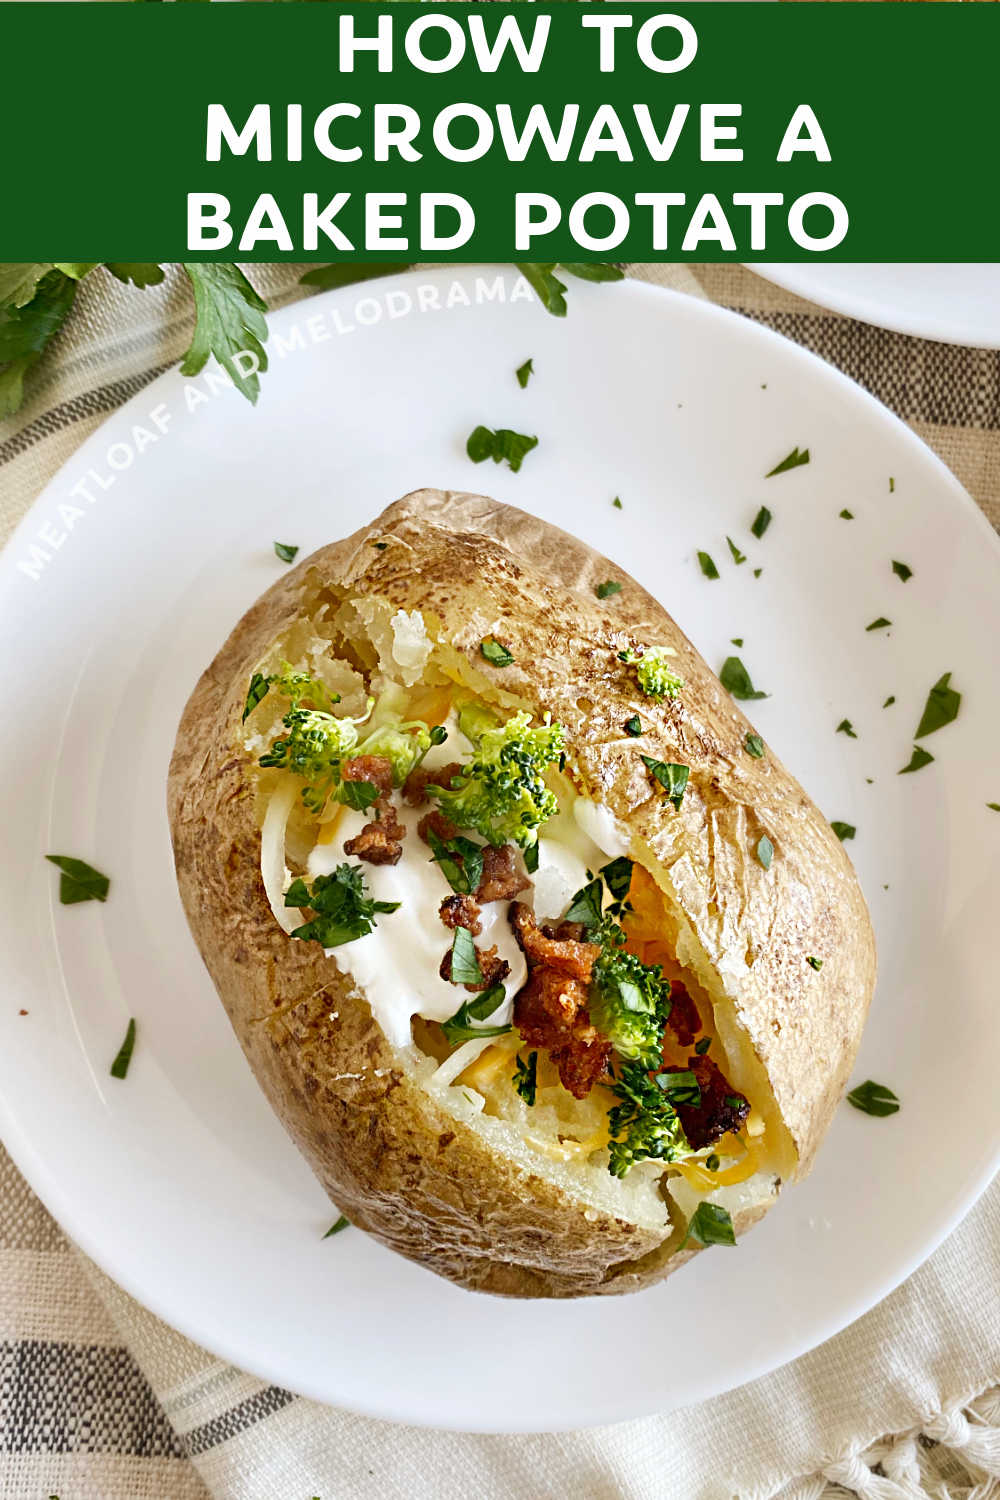 This Easy Microwave Baked Potato recipe makes soft, fluffy potatoes with crispy skins in minutes. Perfect for loaded baked potatoes or a quick side dish when you don't have time to bake or air fry your spuds! via @meamel